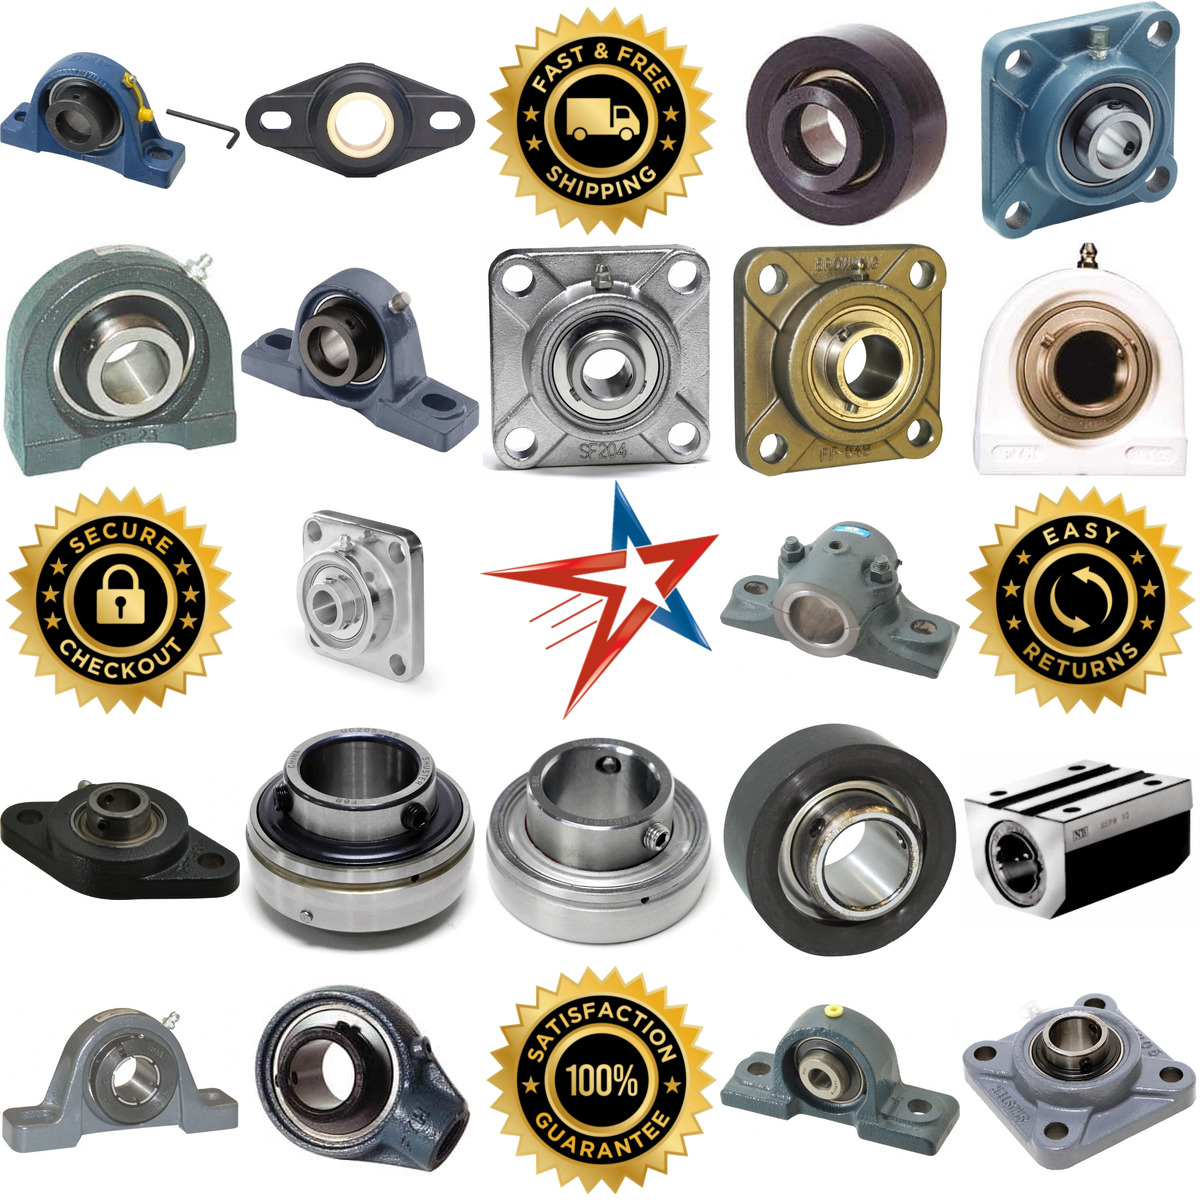 A selection of Mounted and Insert Bearings products on GoVets